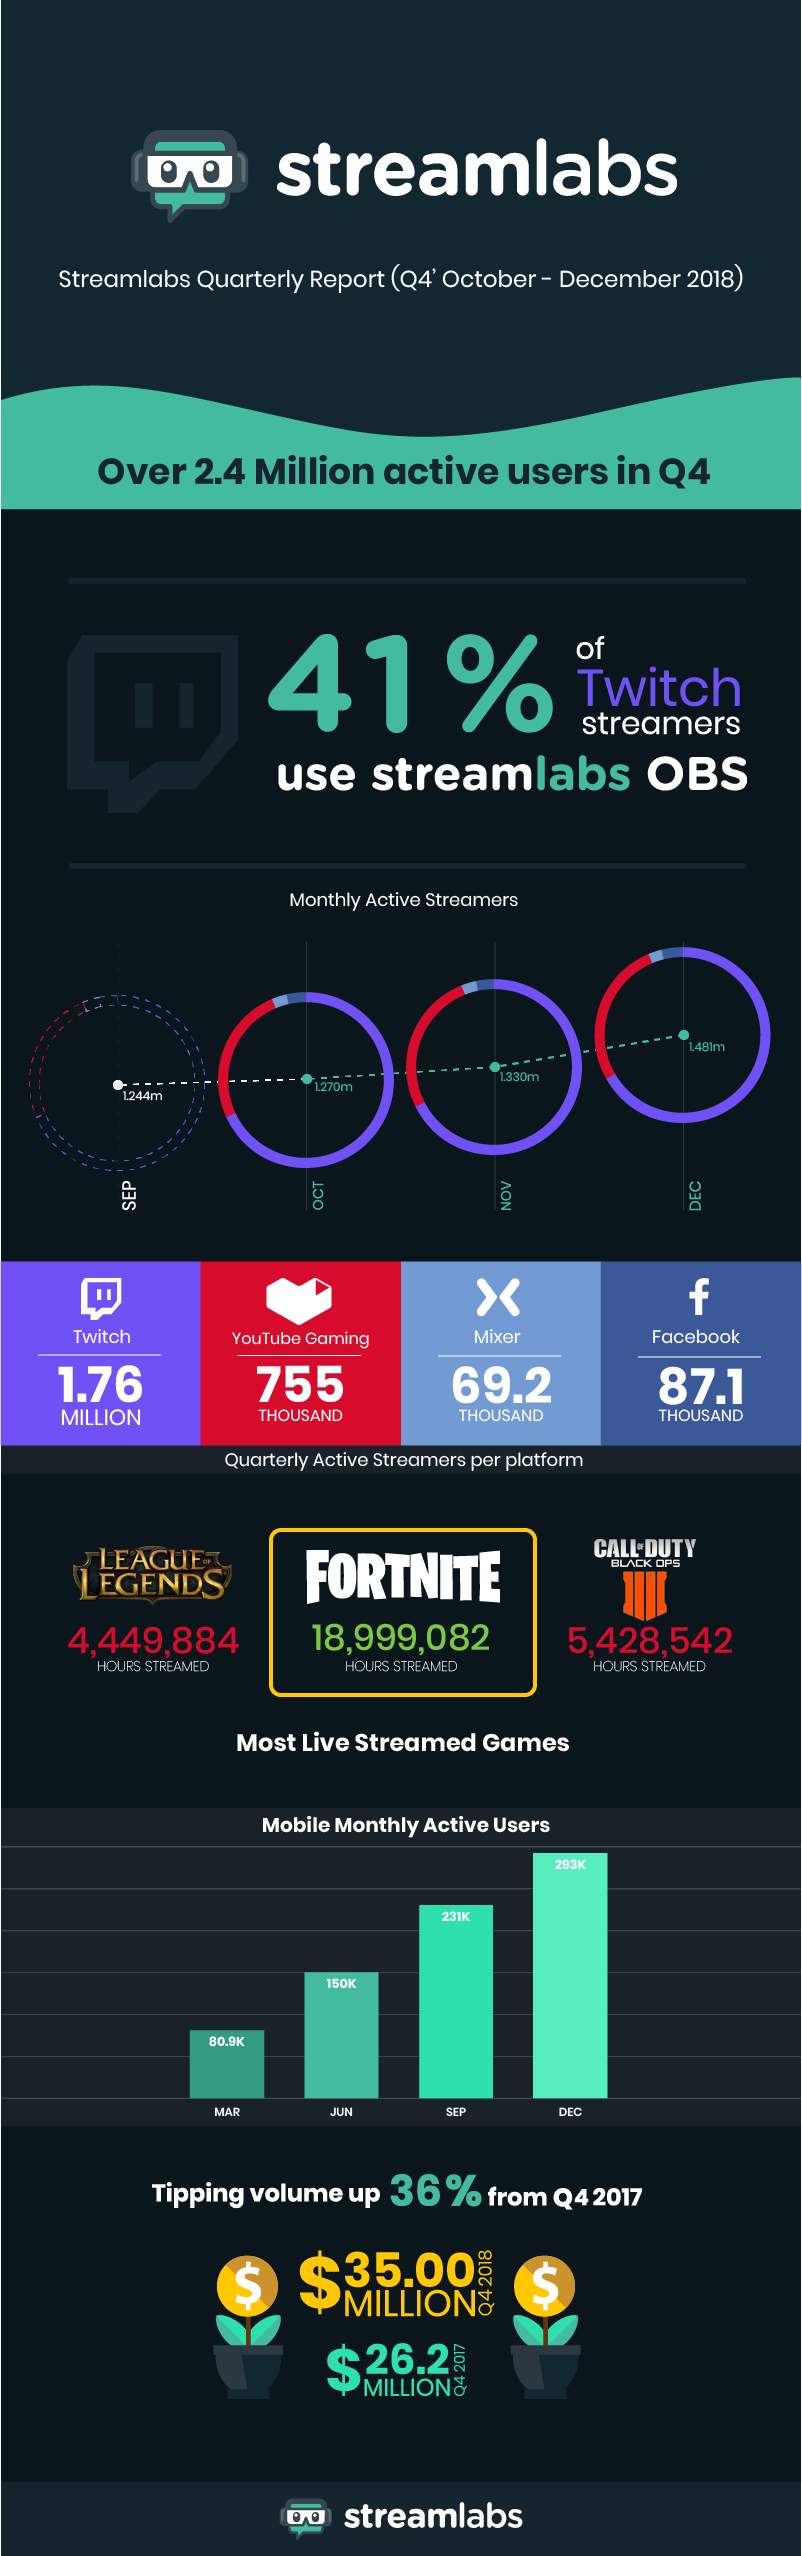 live streaming q4 18 report first decline for fortnite 141m in tips youtube and facebook gaming growing - fortnite player base decline